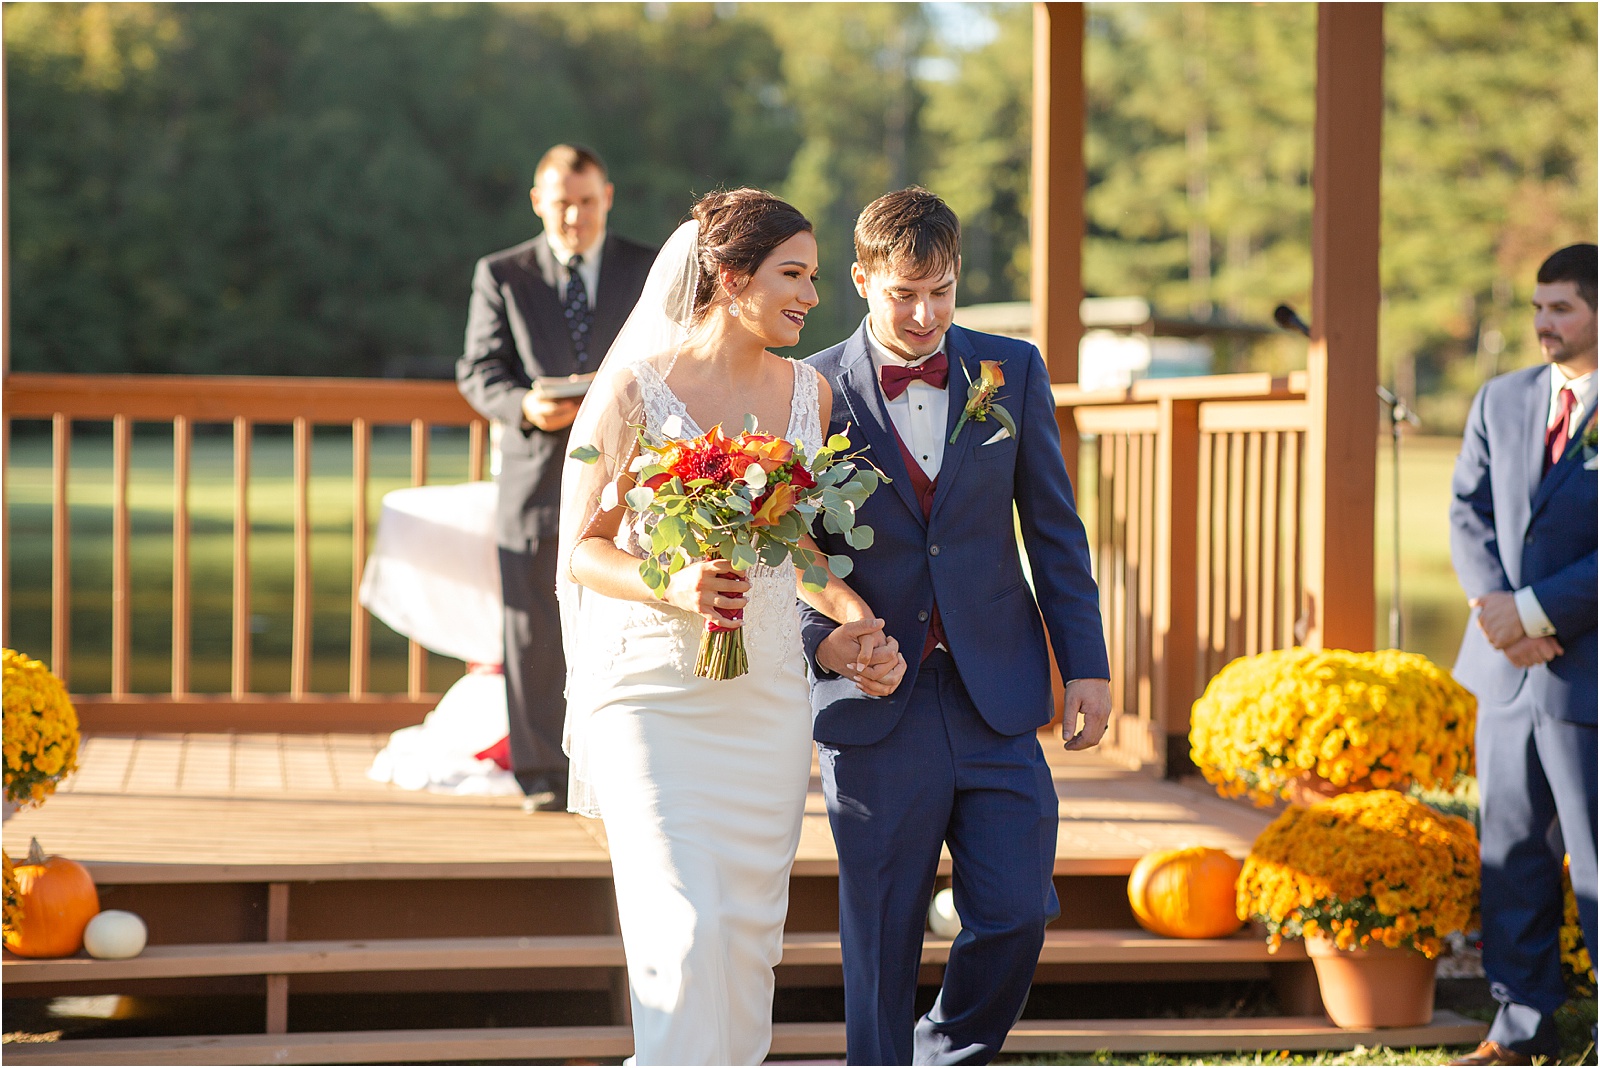 Just married couples holds hands while walking down the aisle from outdoor wedding venue